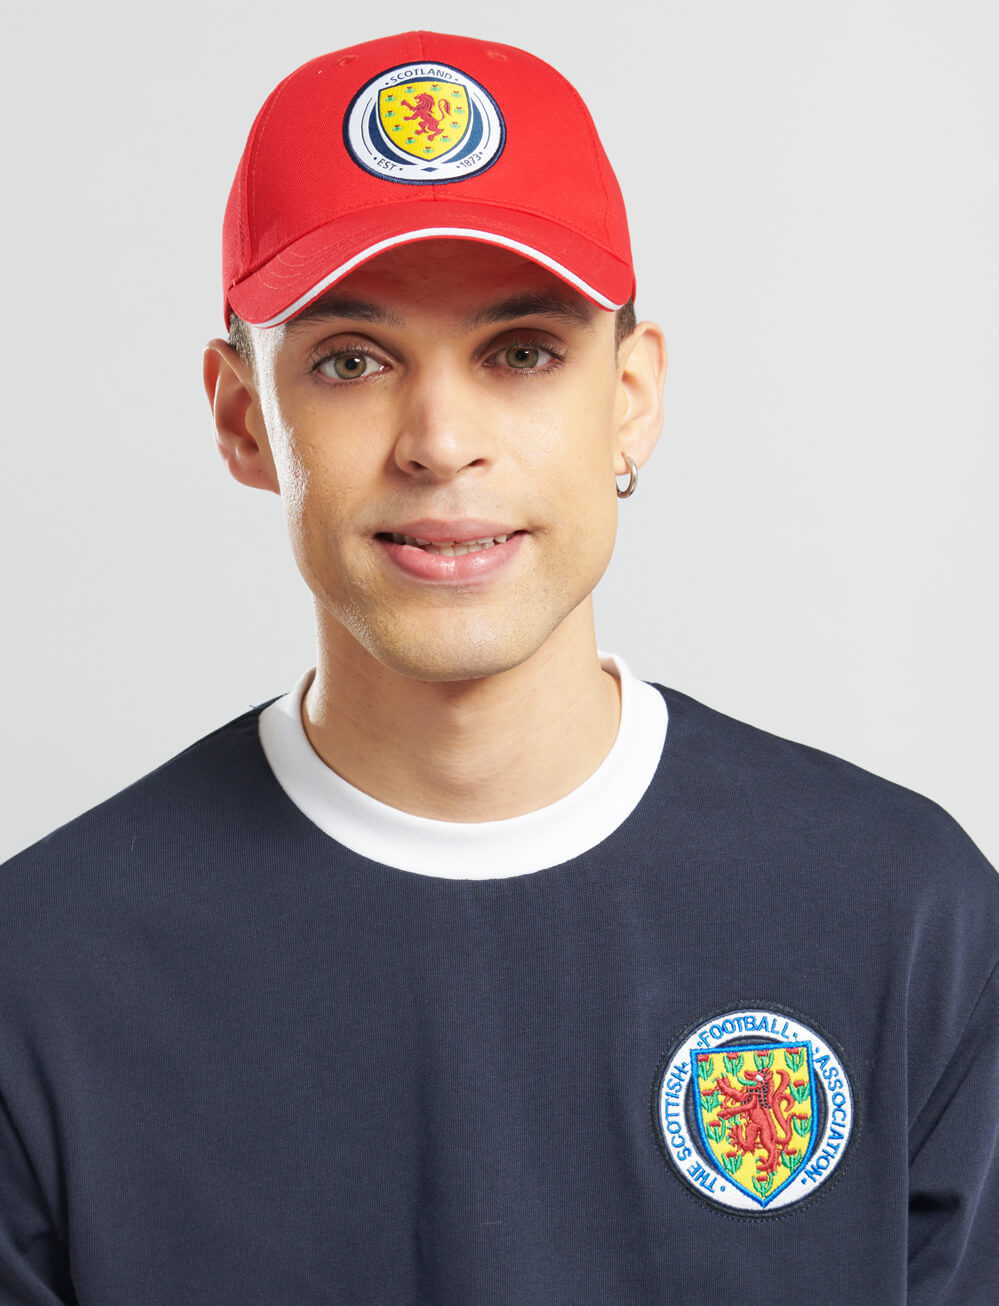 Official Team Scotland Cap - Red - The World Football Store